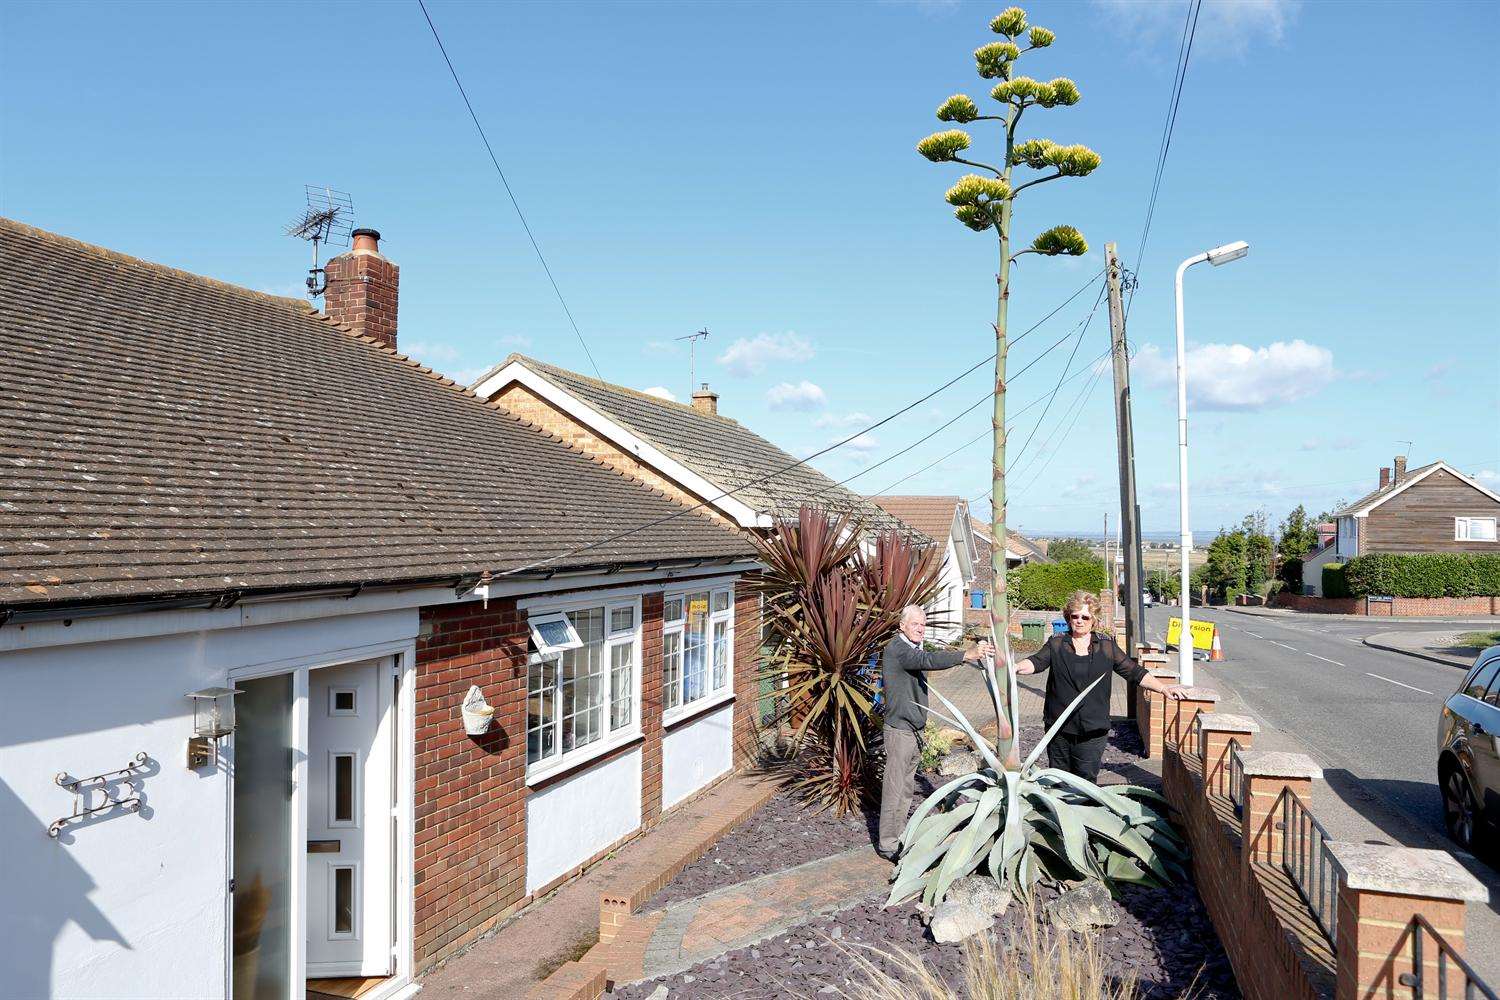 The agave has flowered and sprouted taller than the lampposts